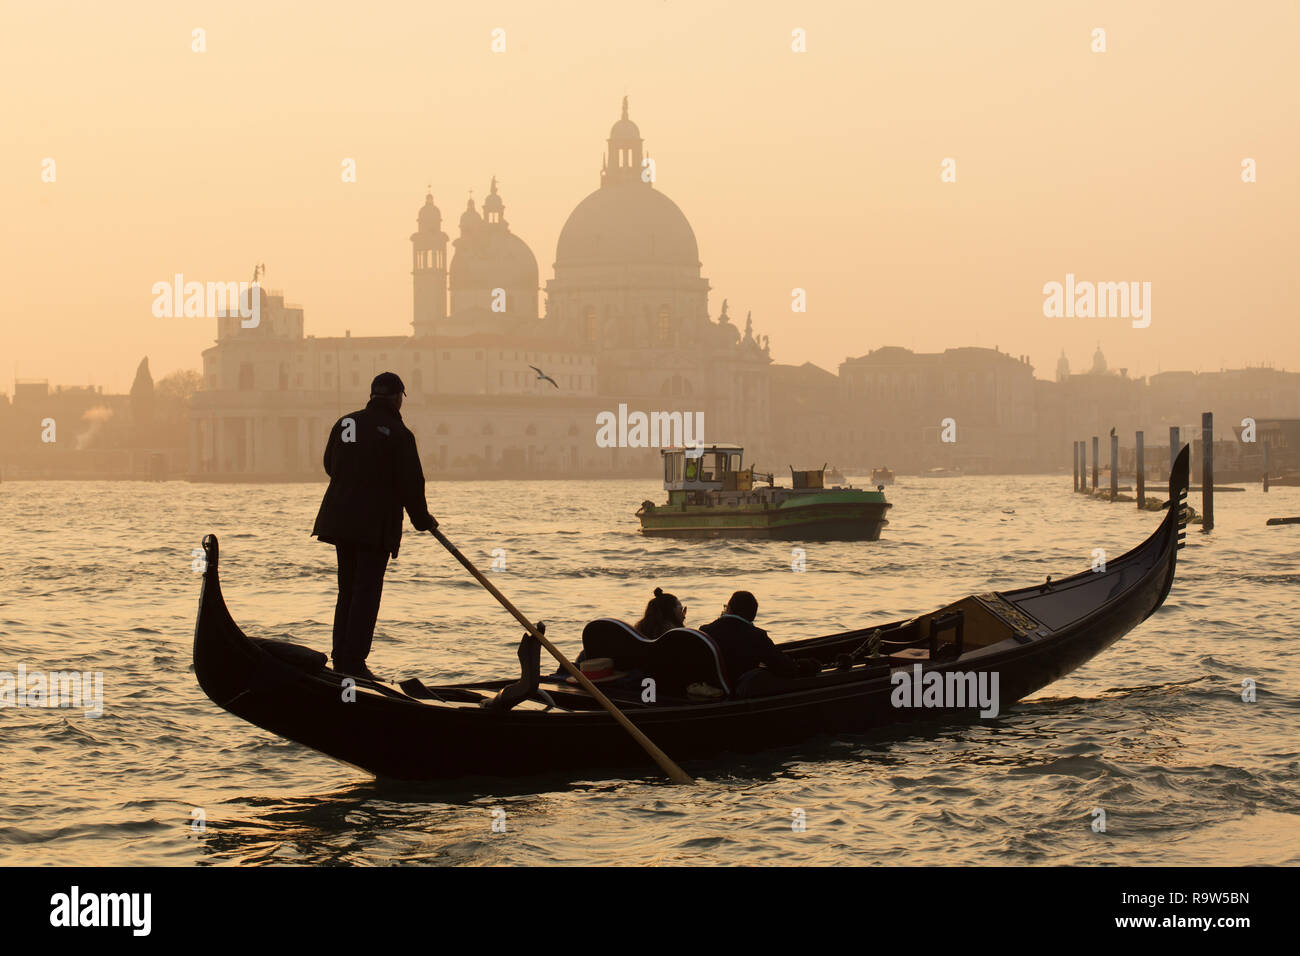 Gondola at sunset in the Venetian Lagoon (Laguna di Venezia) in front of the Basilica of Santa Maria della Salute (Basilica di Santa Maria della Salute) in Venice, Italy. The garbage collecting boat is seen in the background. Stock Photo